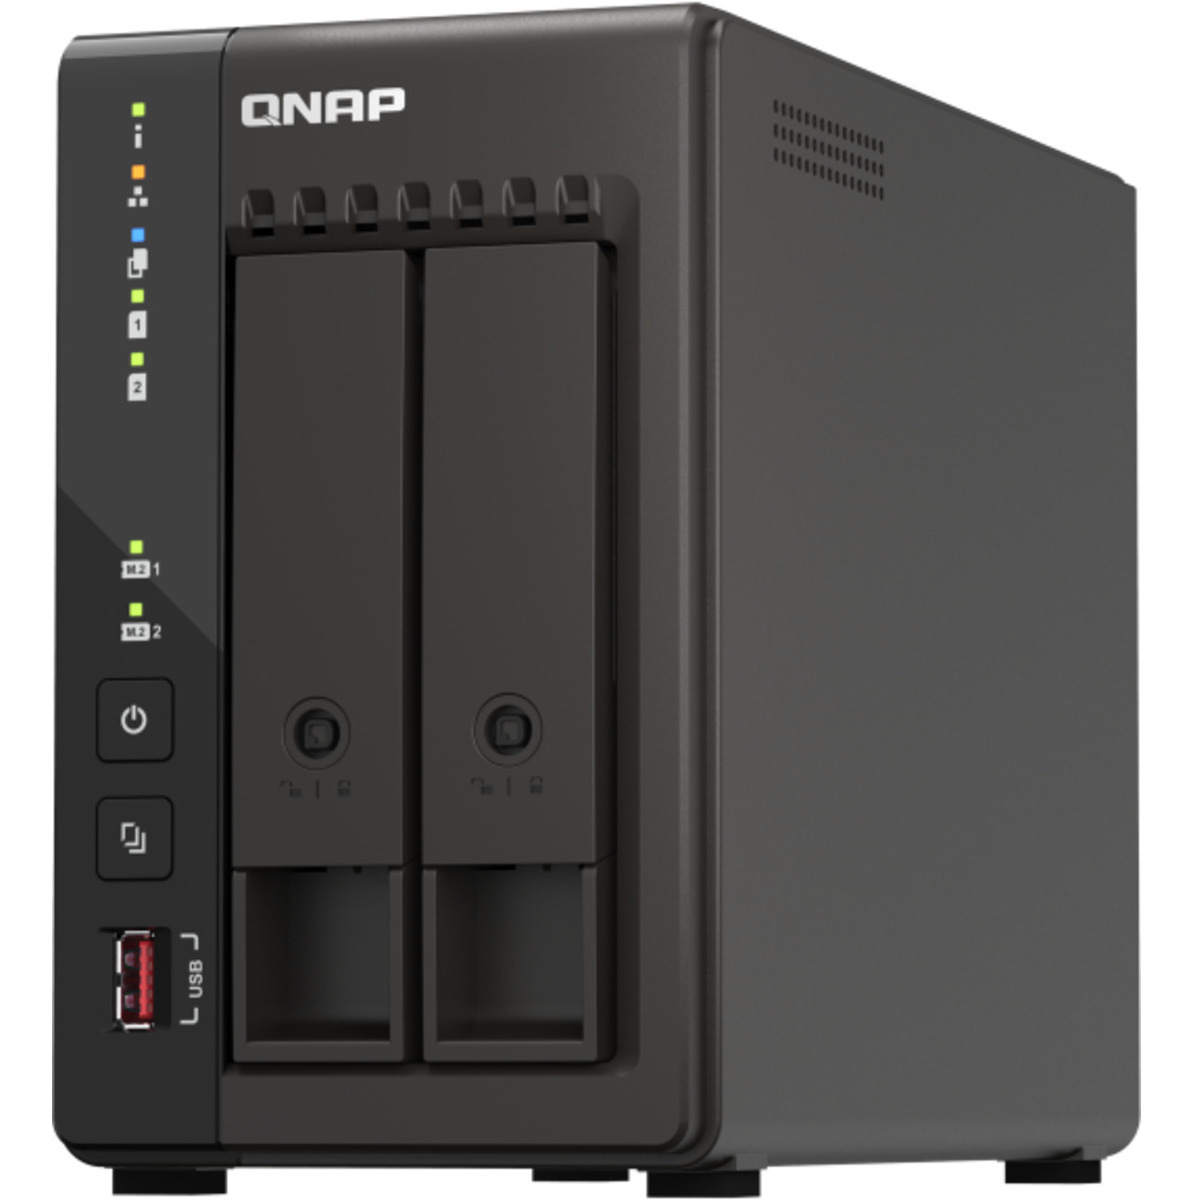 buy QNAP TS-253E Desktop NAS - Network Attached Storage Device Burn-In Tested Configurations - nas headquarters buy network attached storage server device das new raid-5 free shipping usa TS-253E